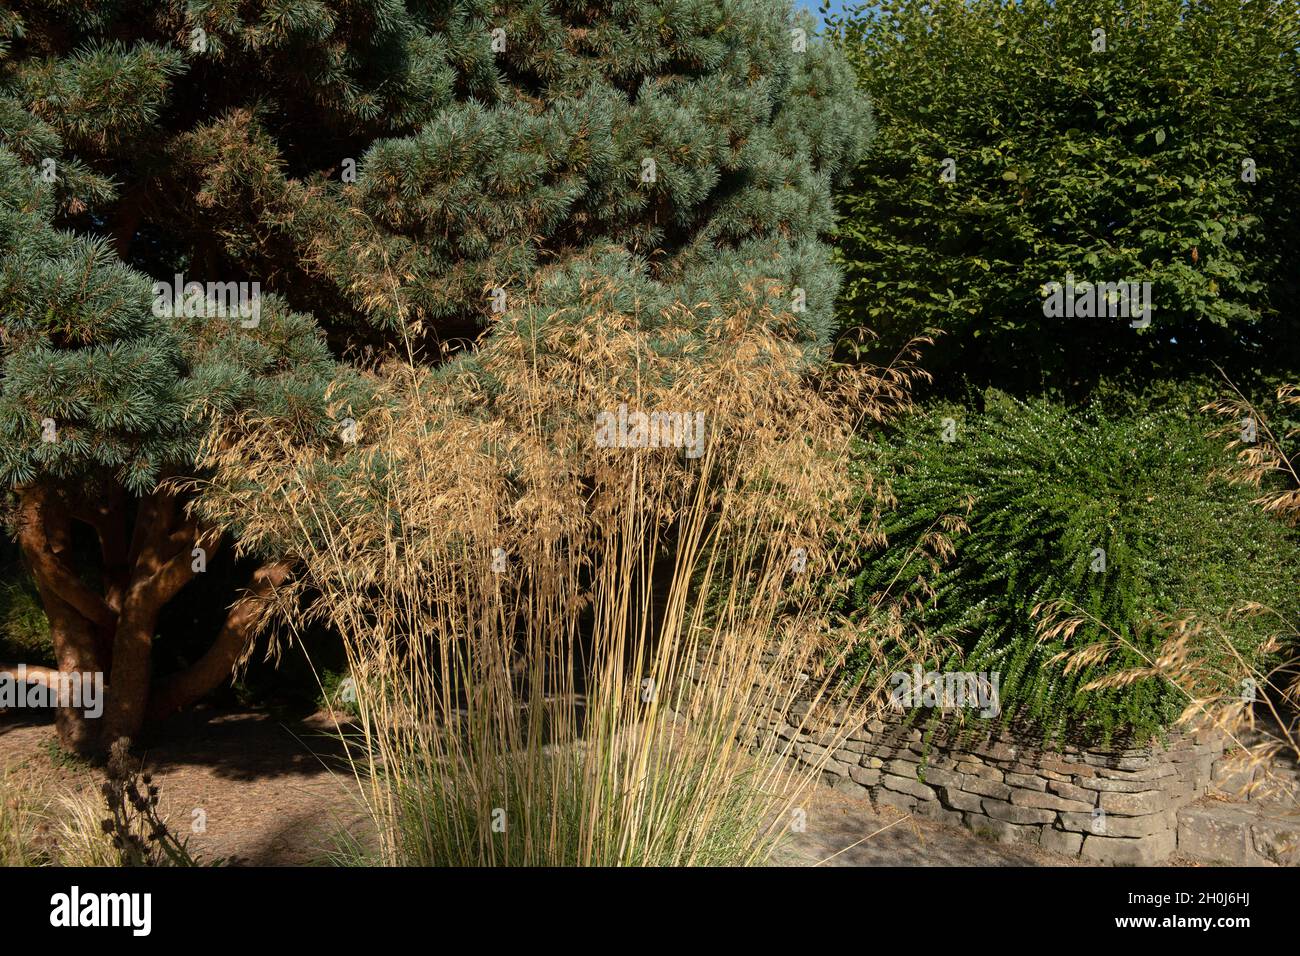 Feathery Plumes of the Ornamental Giant Feather Grass or Golden Oats (Stipa Gigantea) Growing on a Sunny Autumn Day in a Country Cottage Garden Stock Photo